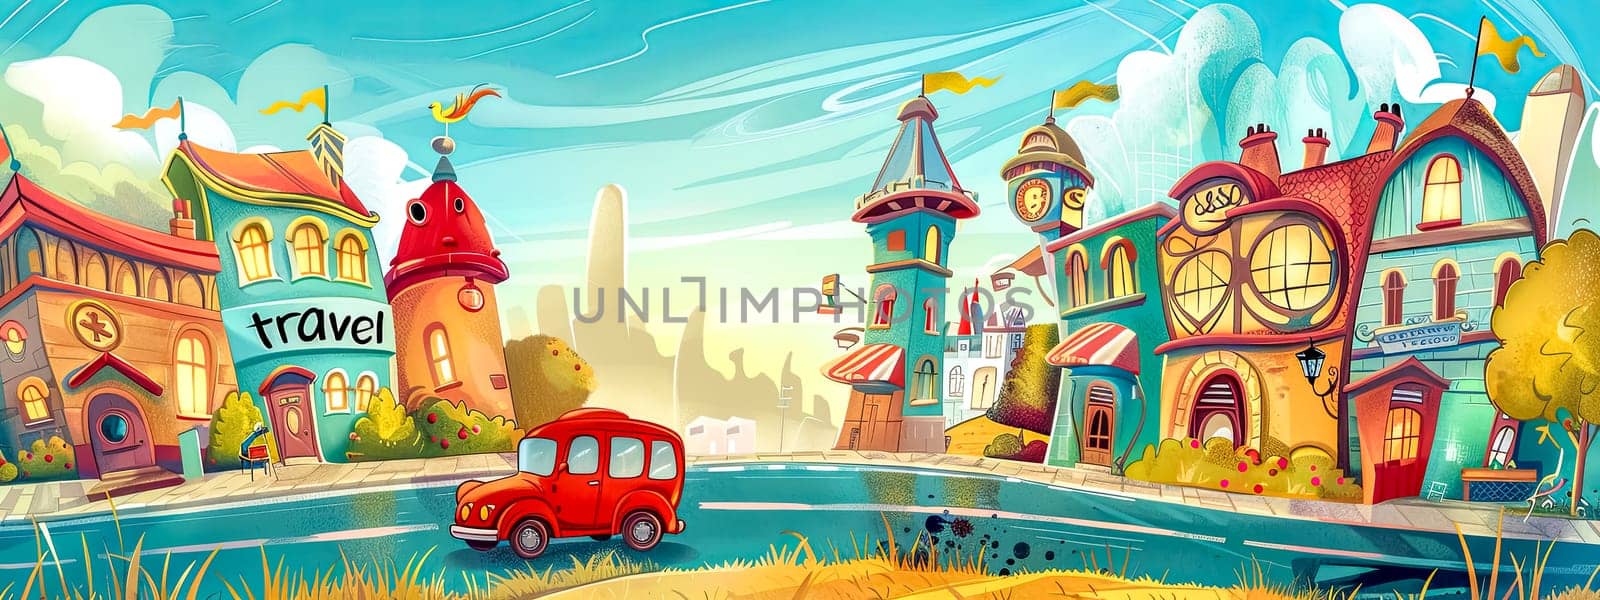 Whimsical cartoon town with red car traveling by Edophoto